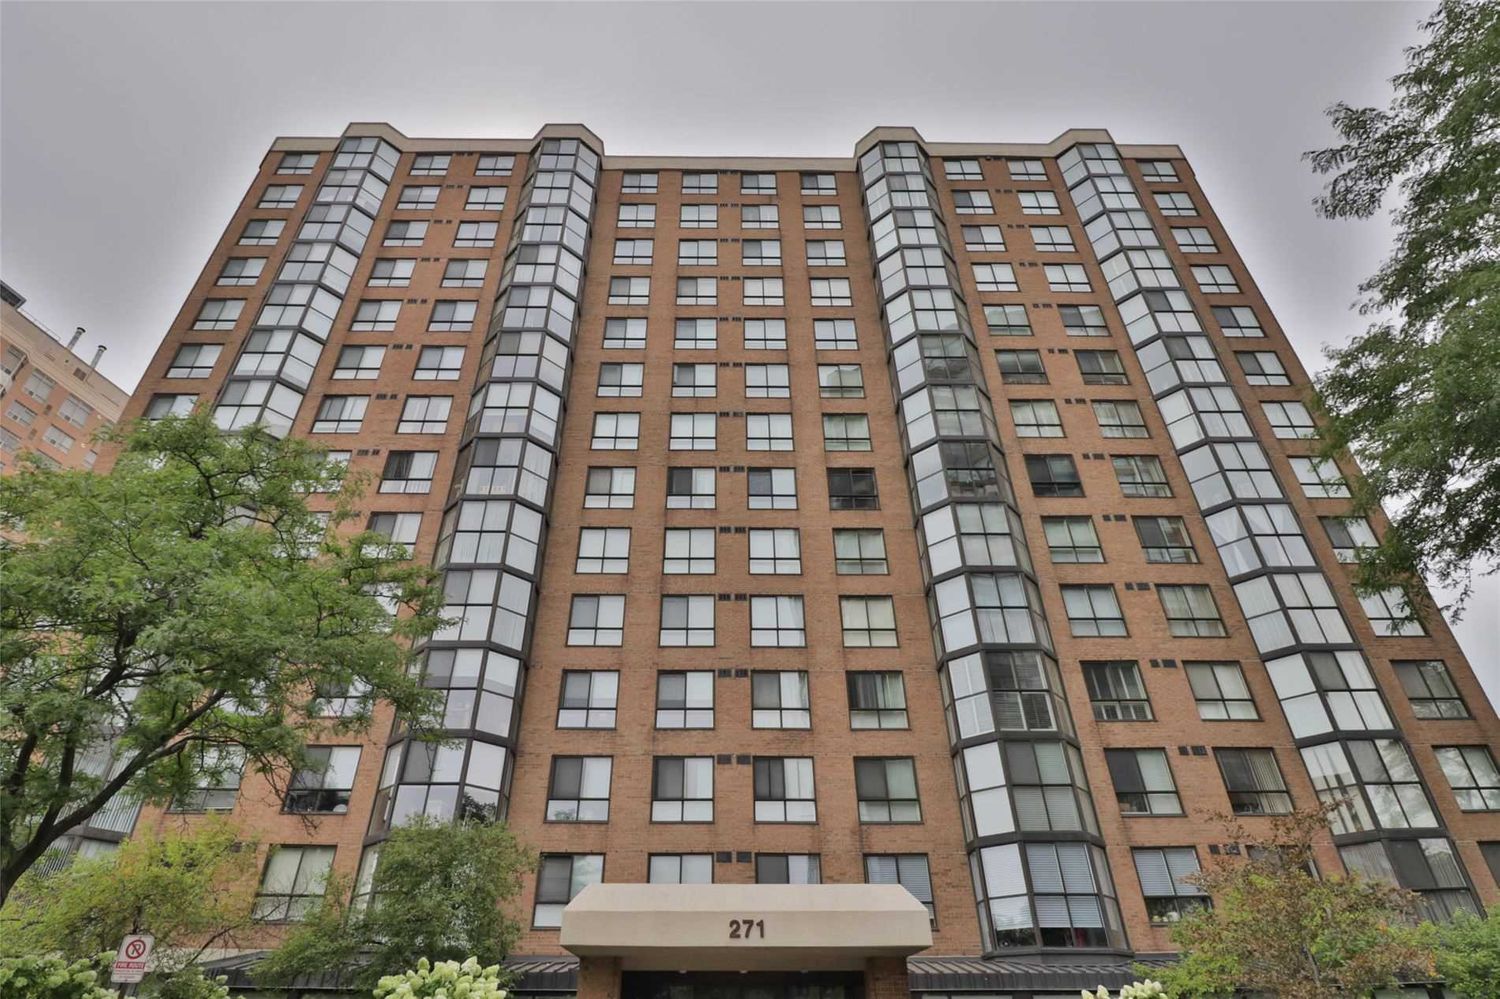 271 Ridley Boulevard. Ridley Boulevard I Condos is located in  North York, Toronto - image #2 of 2